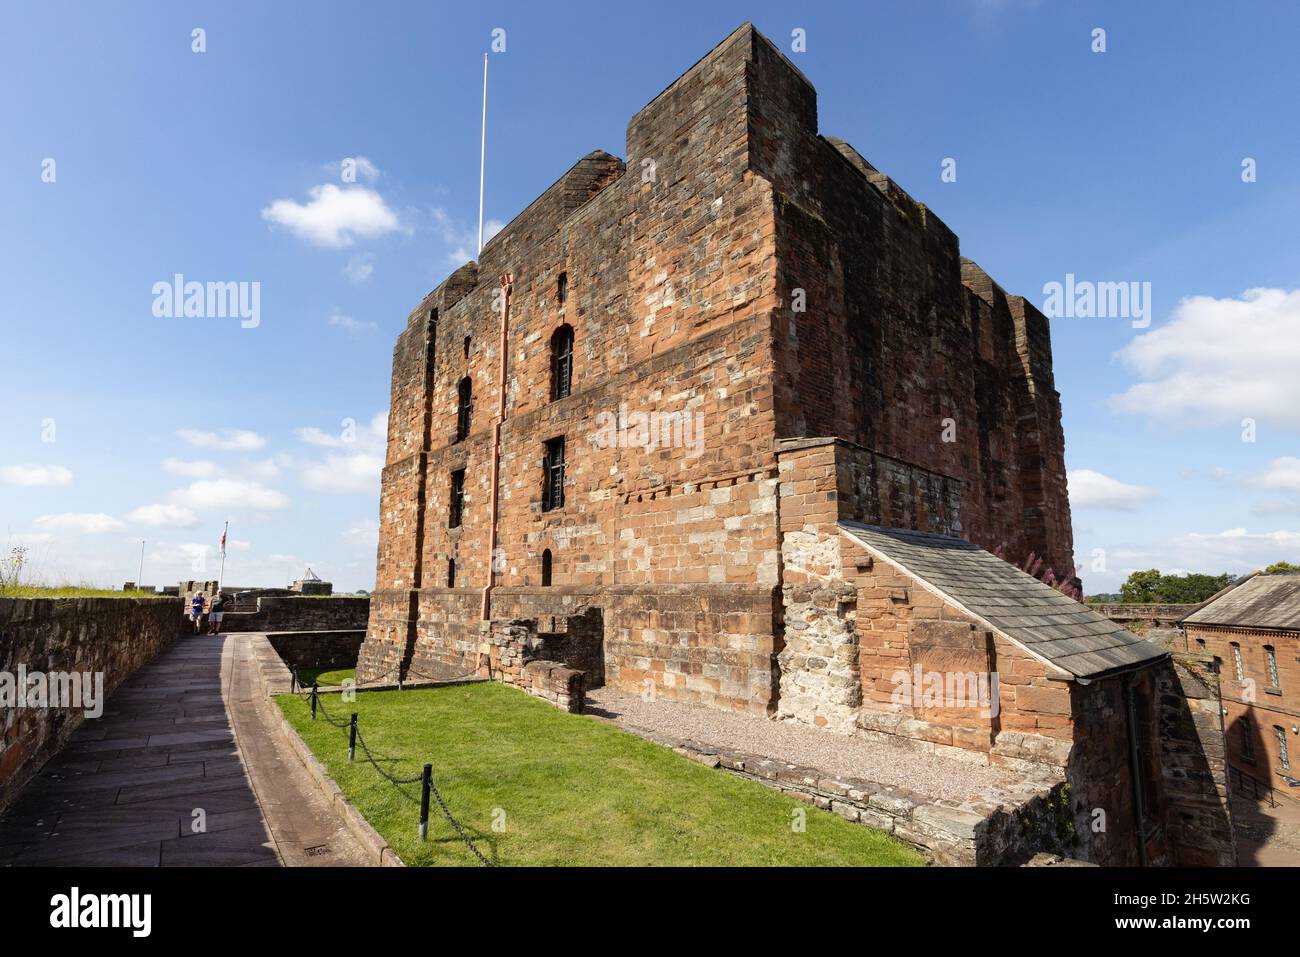 Carlisle Castle - The Keep, or Great Tower, an 11th century medieval building owned by English Heritage, Carlisle, Cumbria UK Stock Photo